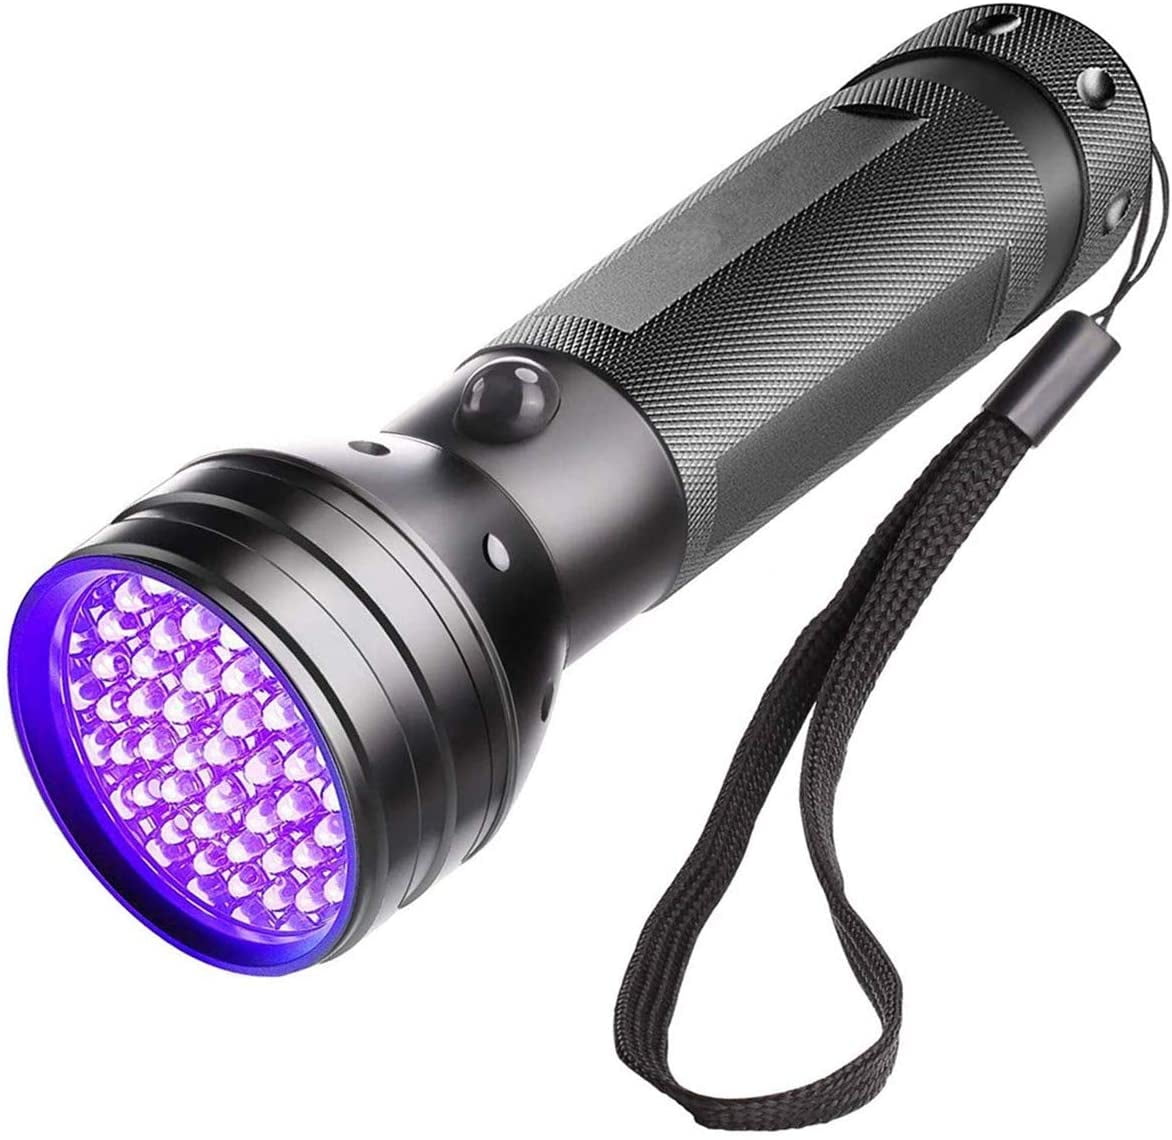 Ultraviolet UV 395nm 51 Leds Flashlight Detects Pet Stains Bed Bugs Scorpions 